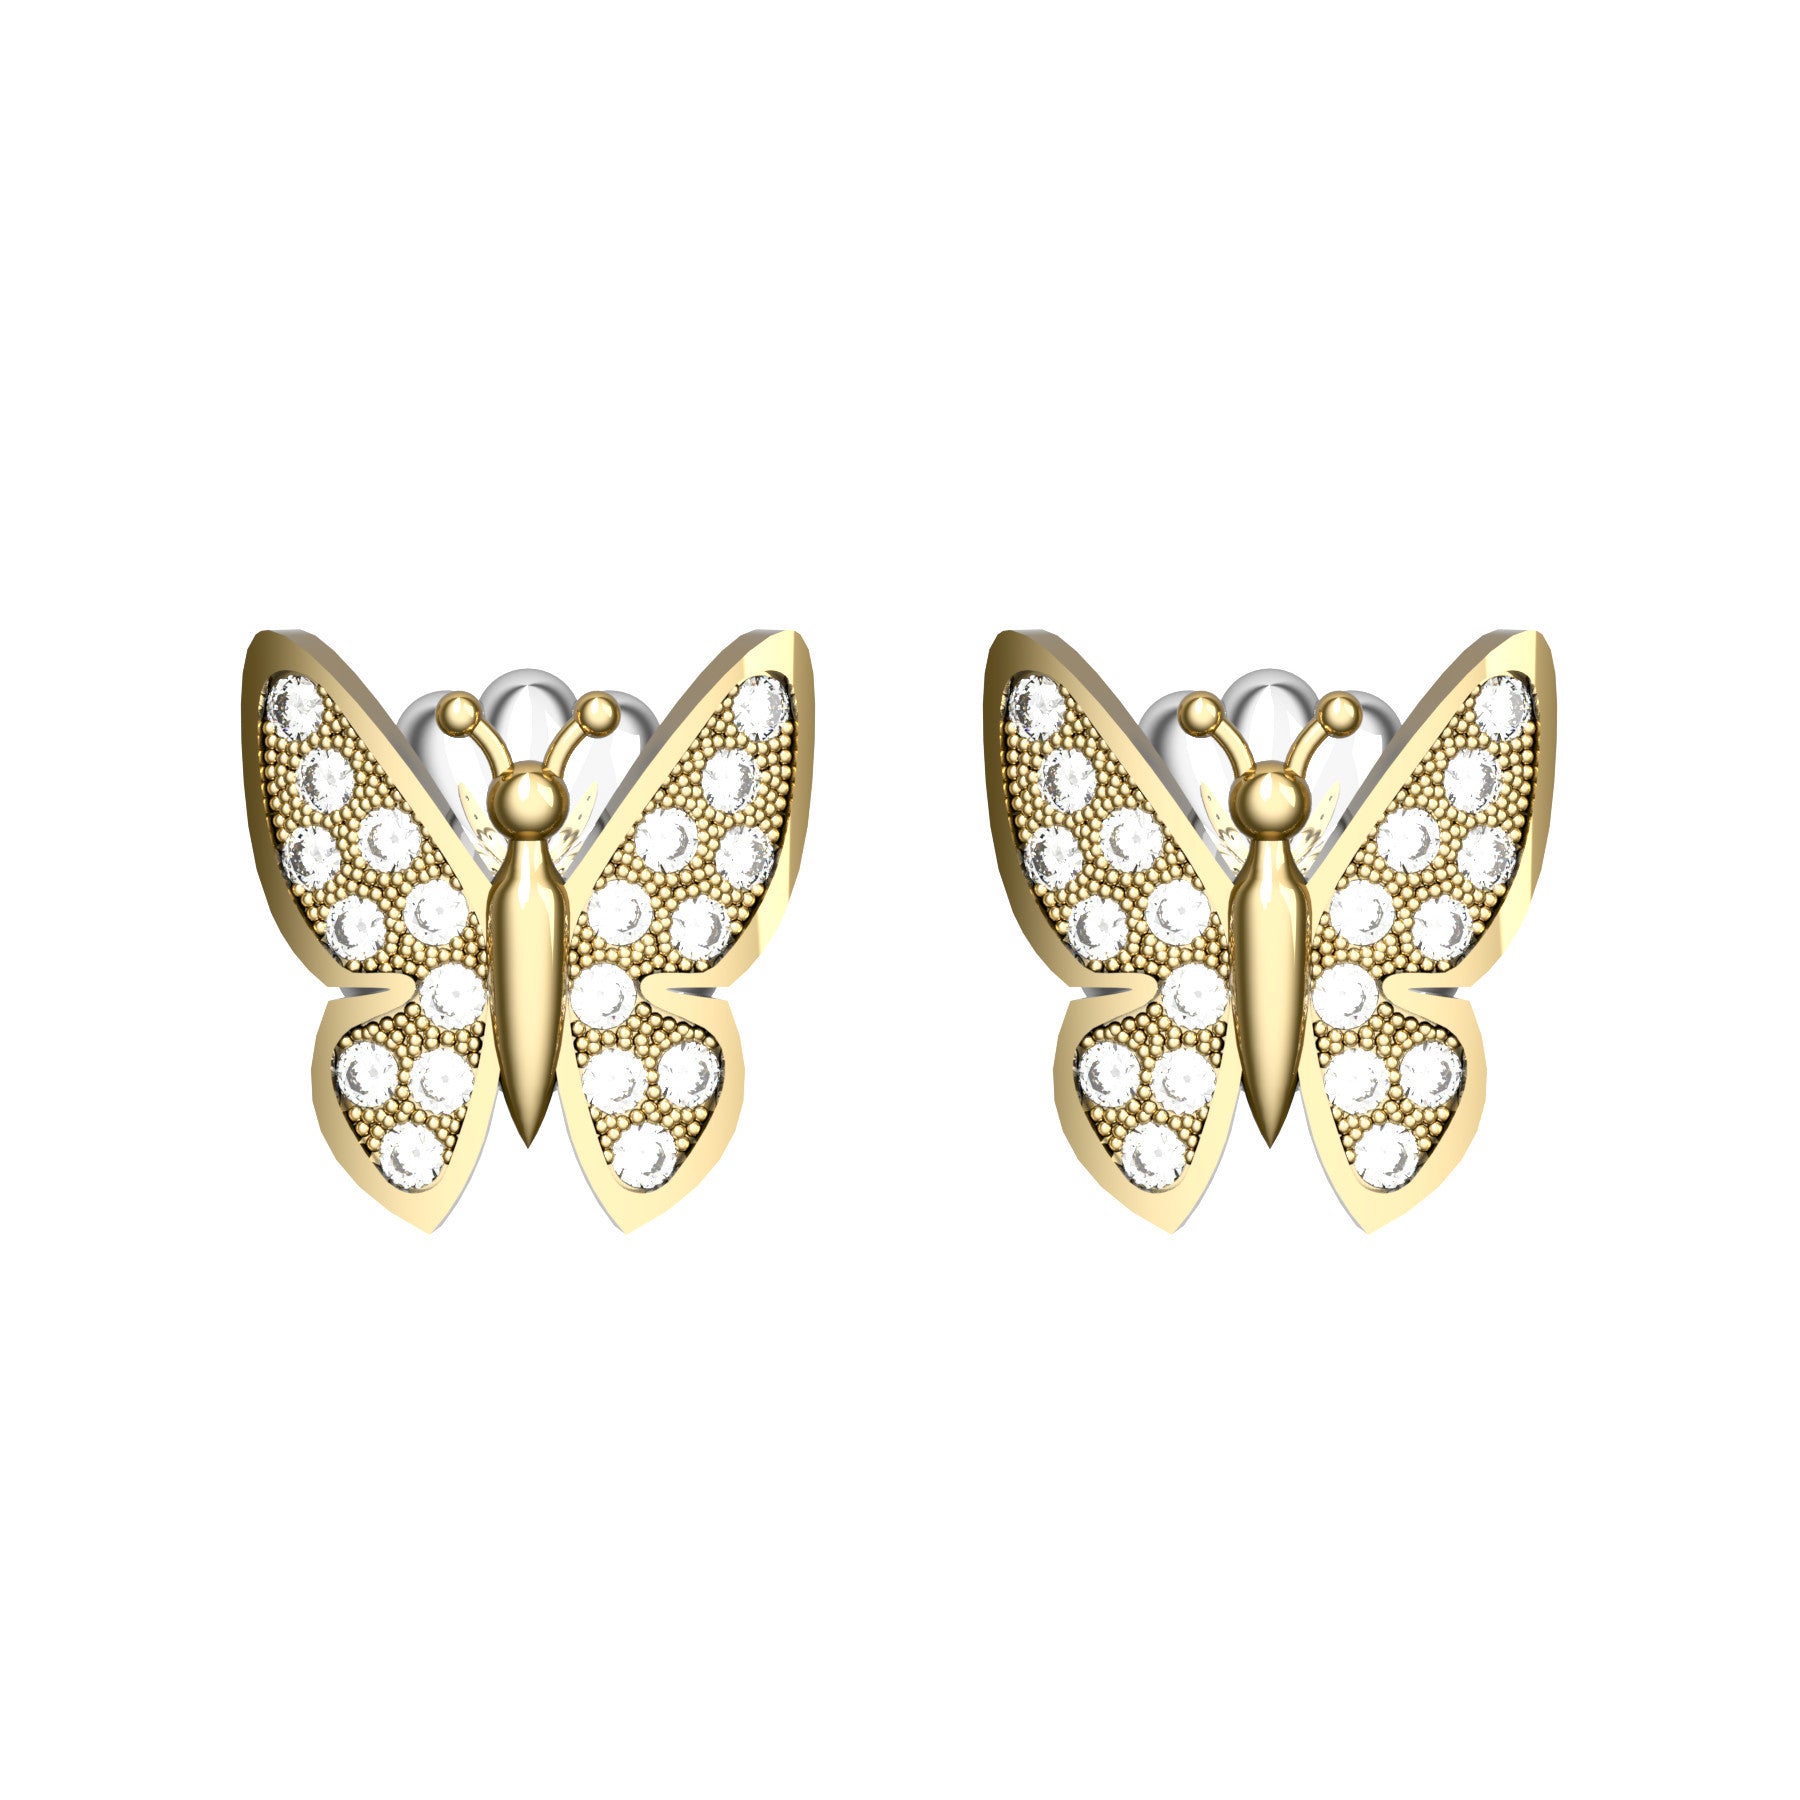 butterfly earrings, natural round diamonds, 18 K yellow gold, weight about 2,4 g (0.08 oz), size 10x9 mm 